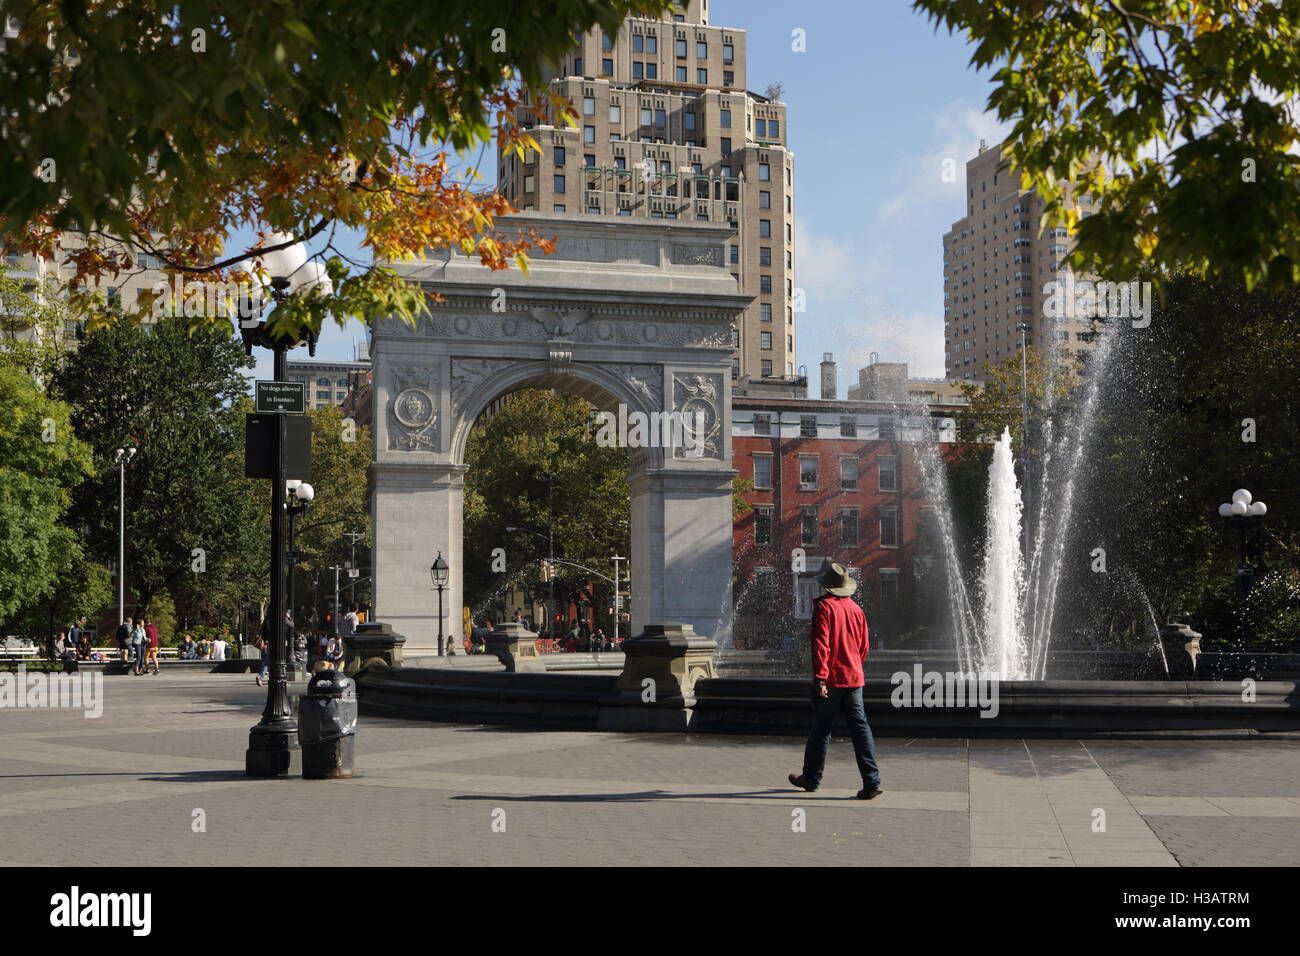 People walk and talk beside the fountain in Washington Square Park, New York. Buildings on Fifth Avenue and the arch can be seen Stock Photo